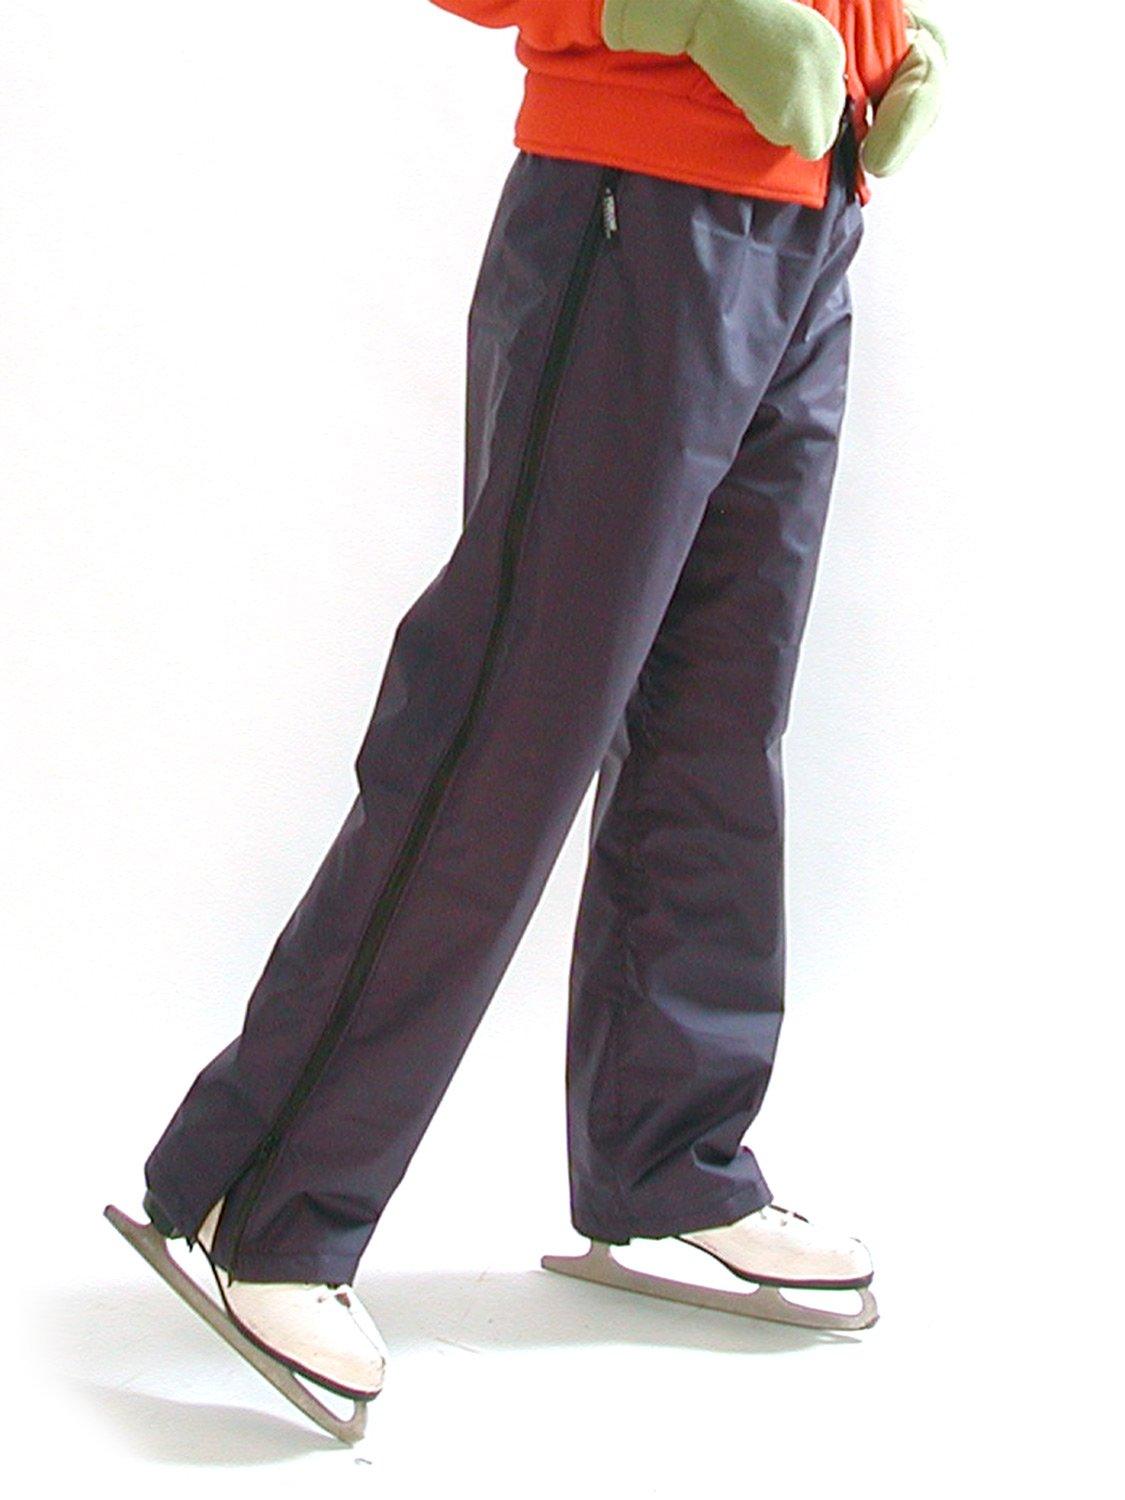 Fleece-Lined Pants Tutorial & Free Pattern – Zune's Sewing Therapy